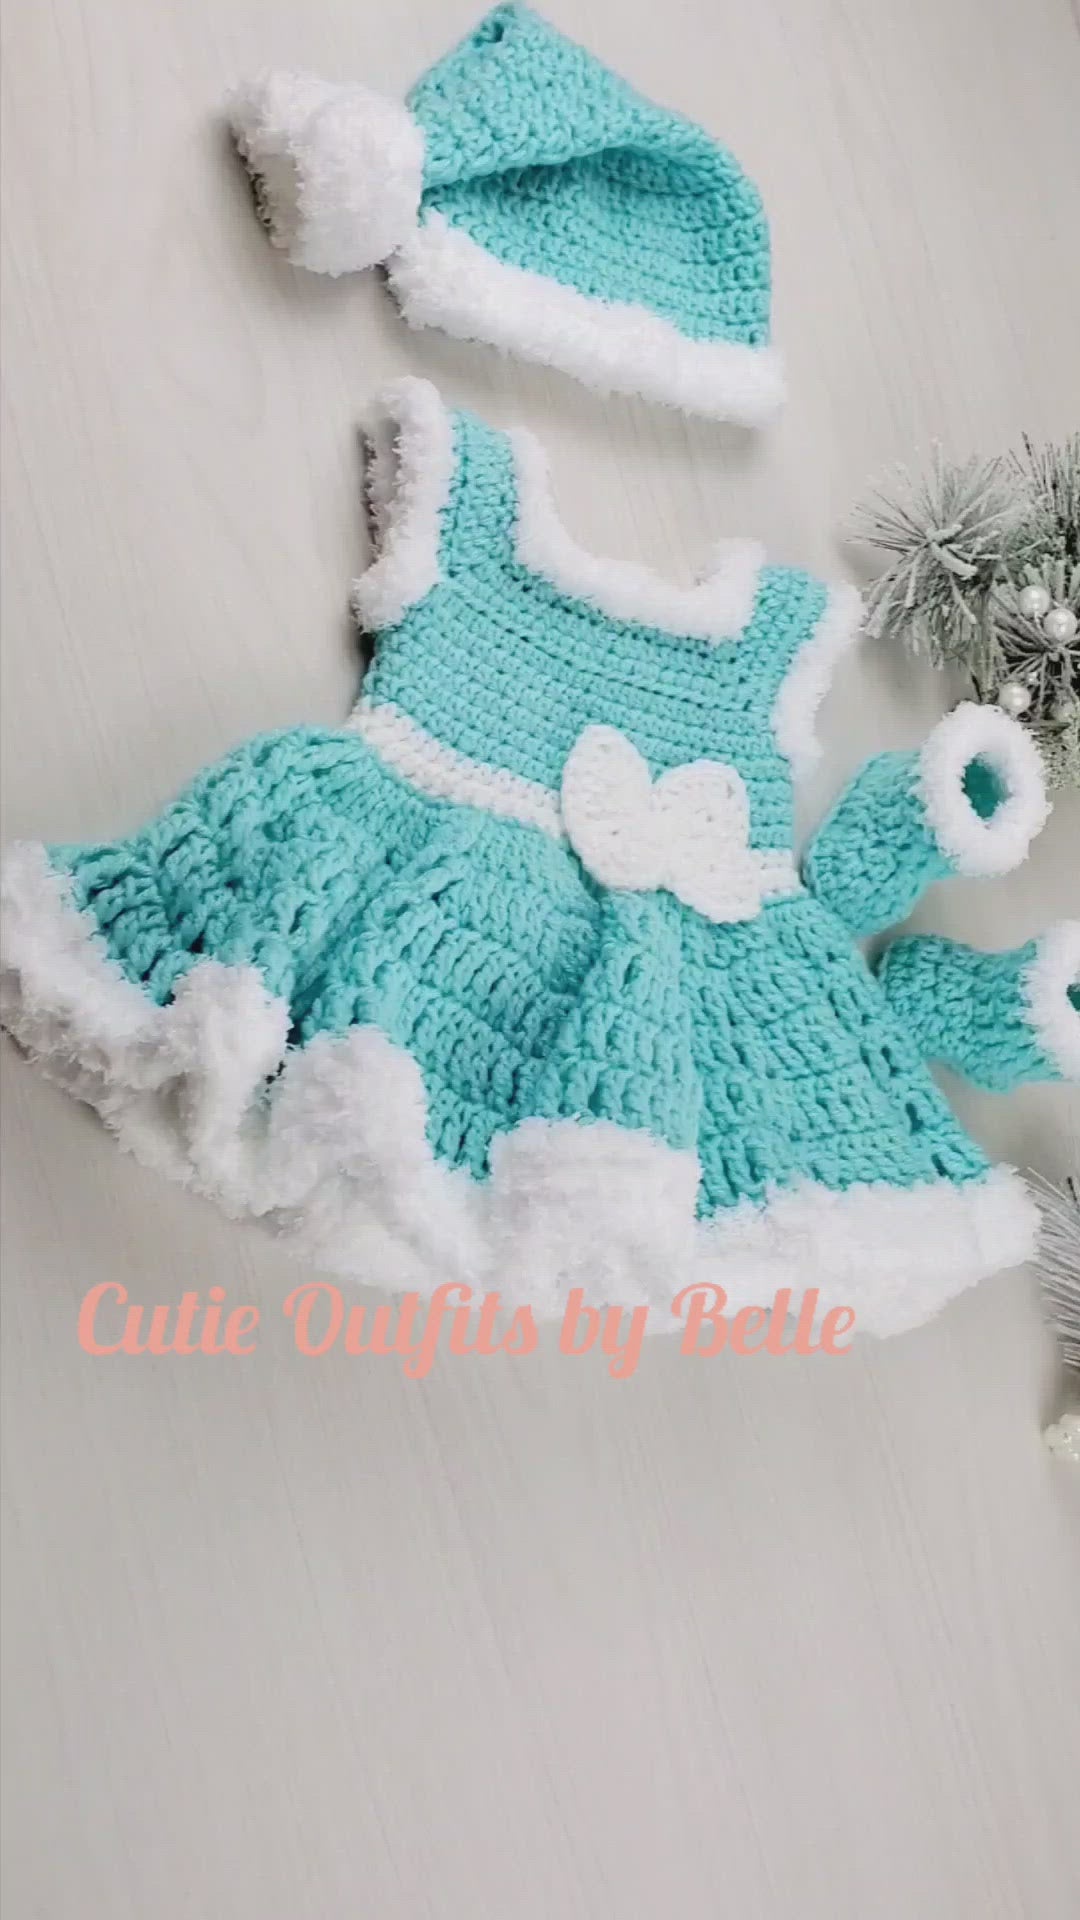 Aqua Crochet Baby Outfit, Crochet Newborn Outfit, Photo Prop Outfit, Infant Christmas